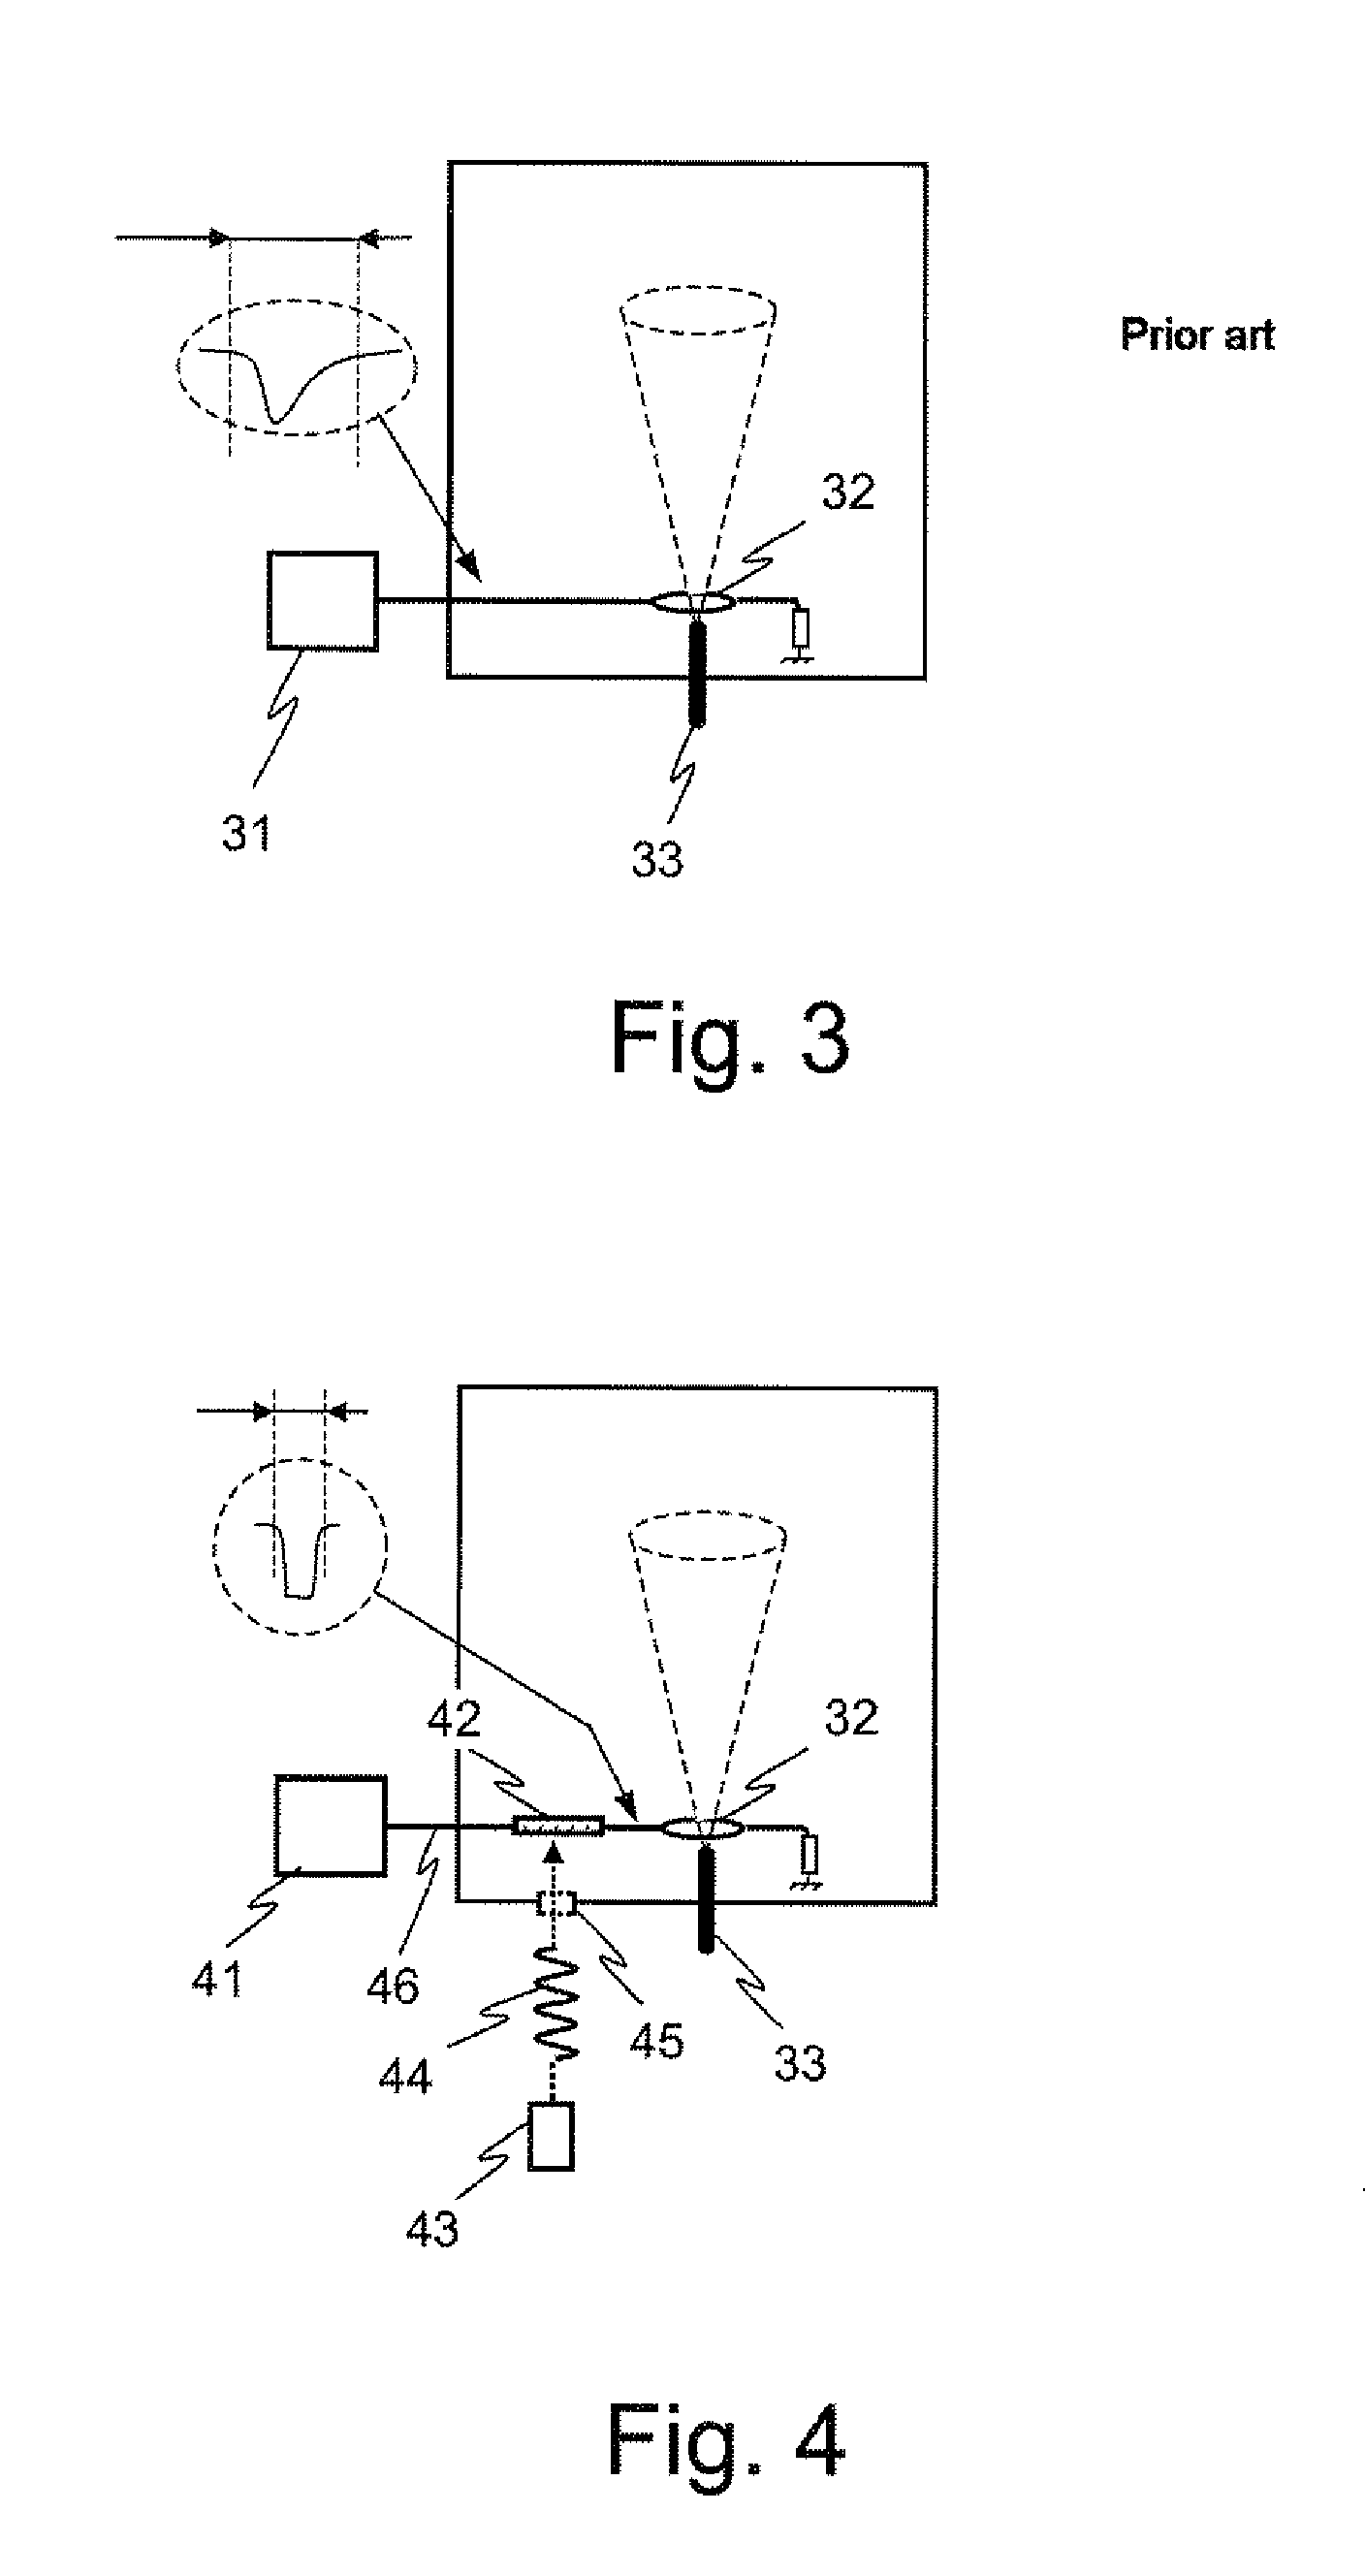 Tomographic Atom Probe Comprising an Electro-Optical Generator of High-Voltage Electrical Pulses